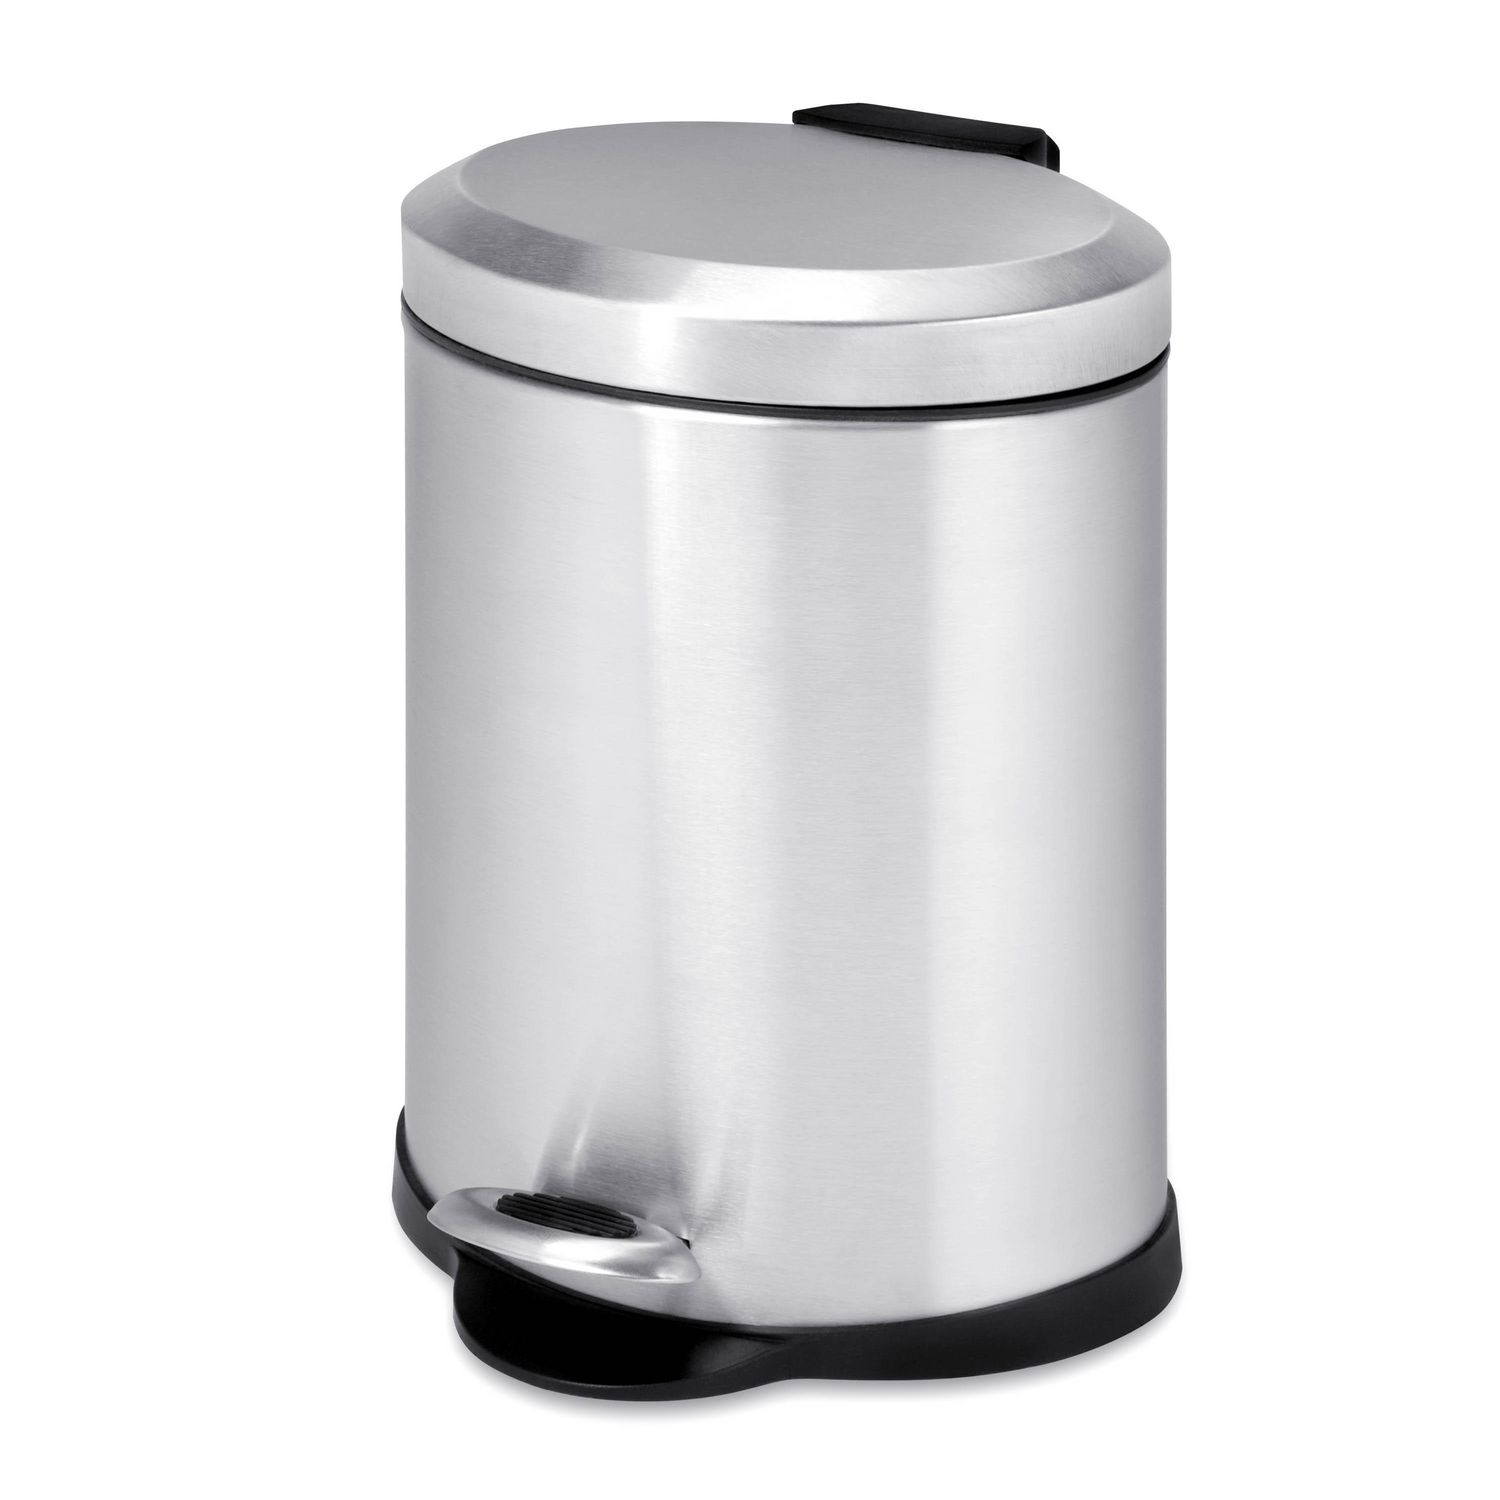 Honey-Can-Do 5 L Oval Step Can | Walmart Canada